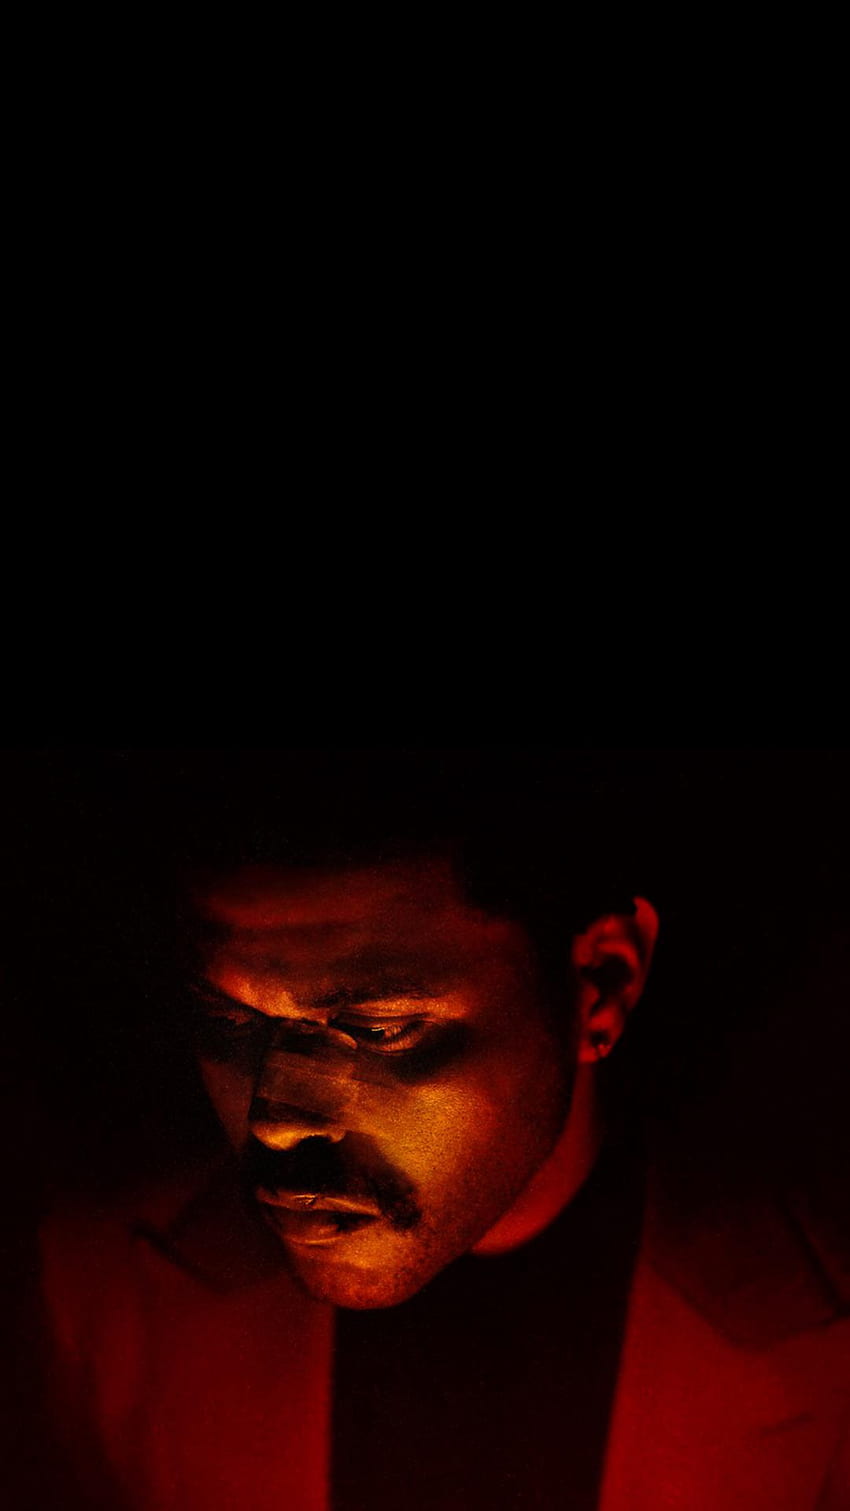 After Hours : TheWeeknd, The Weeknd Thursday wallpaper ponsel HD